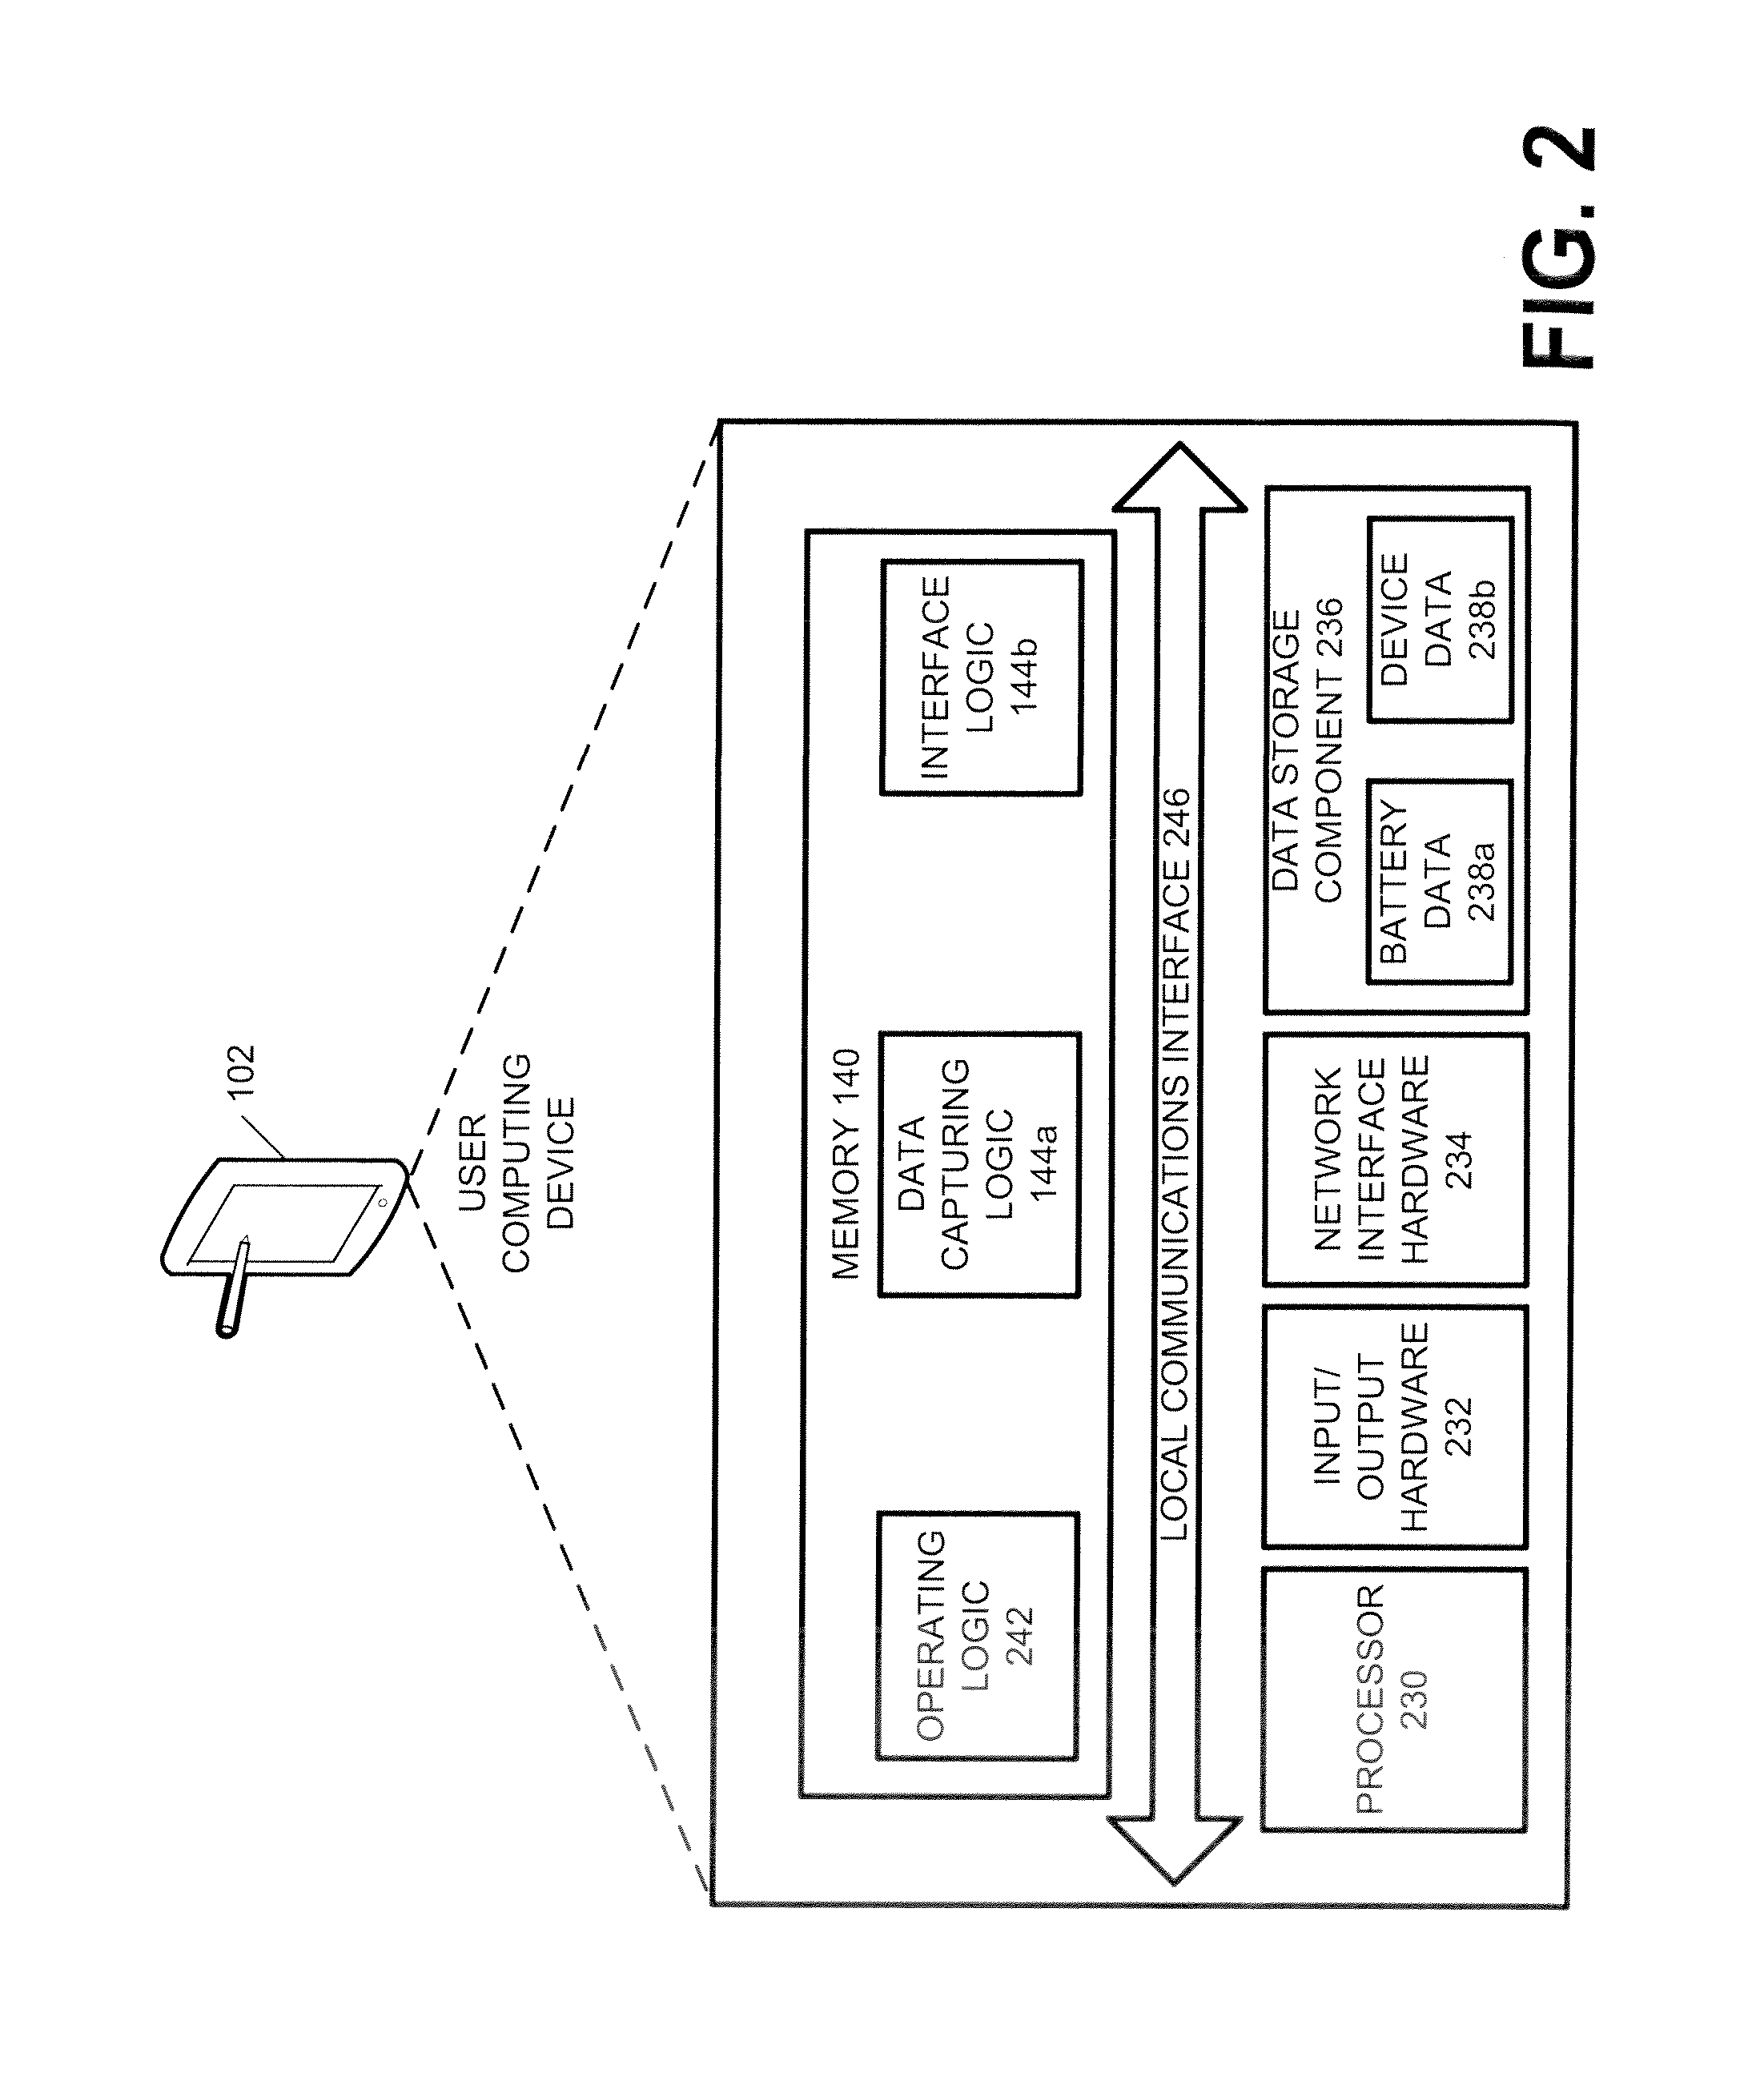 Systems and methods for remotely determining a battery characteristic